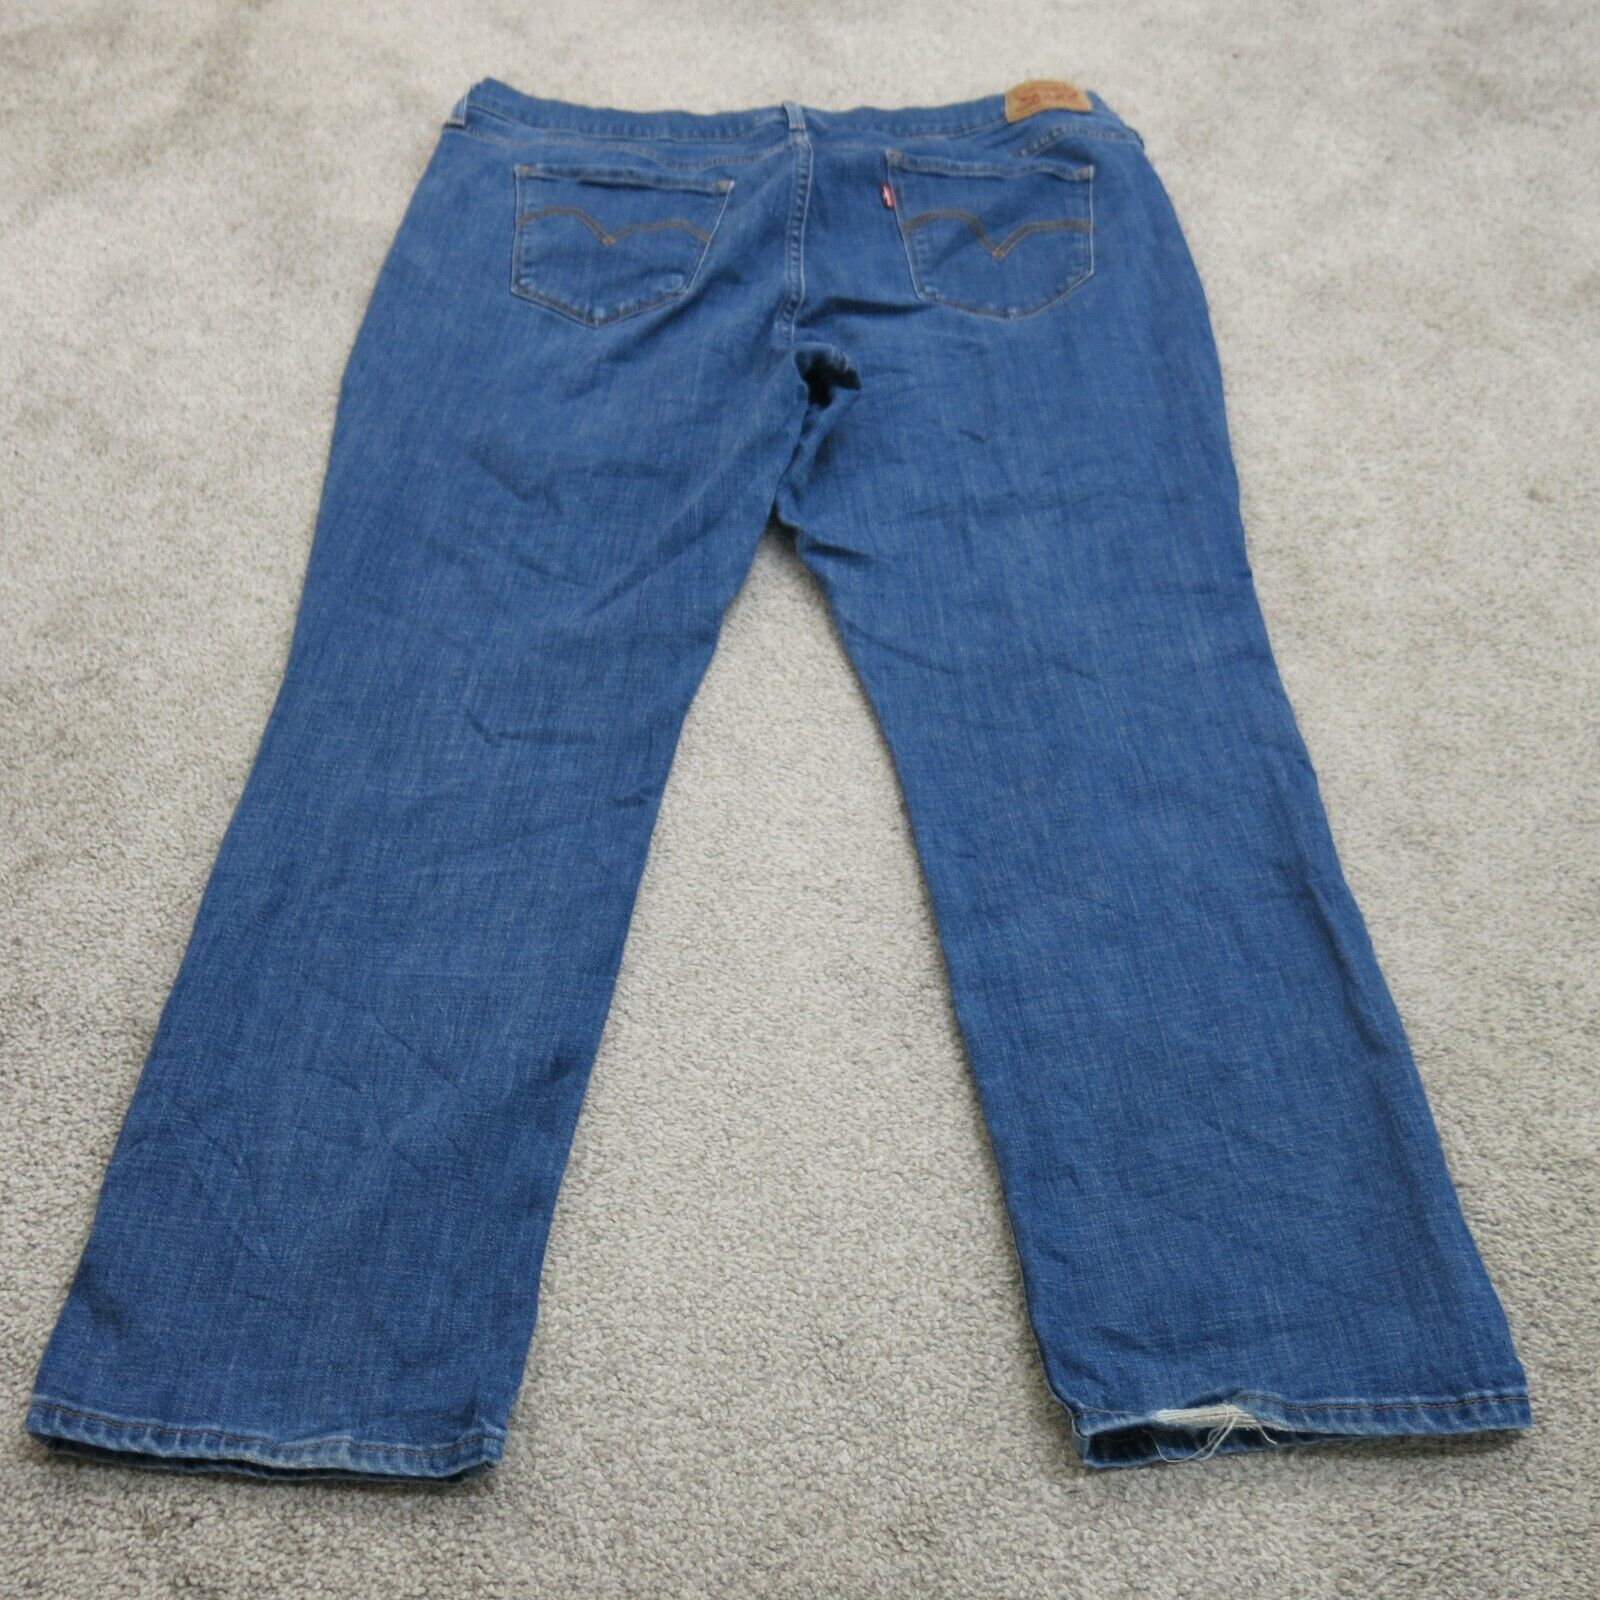 Levi's Classic Straight Jeans Straight Fit in Medium blue